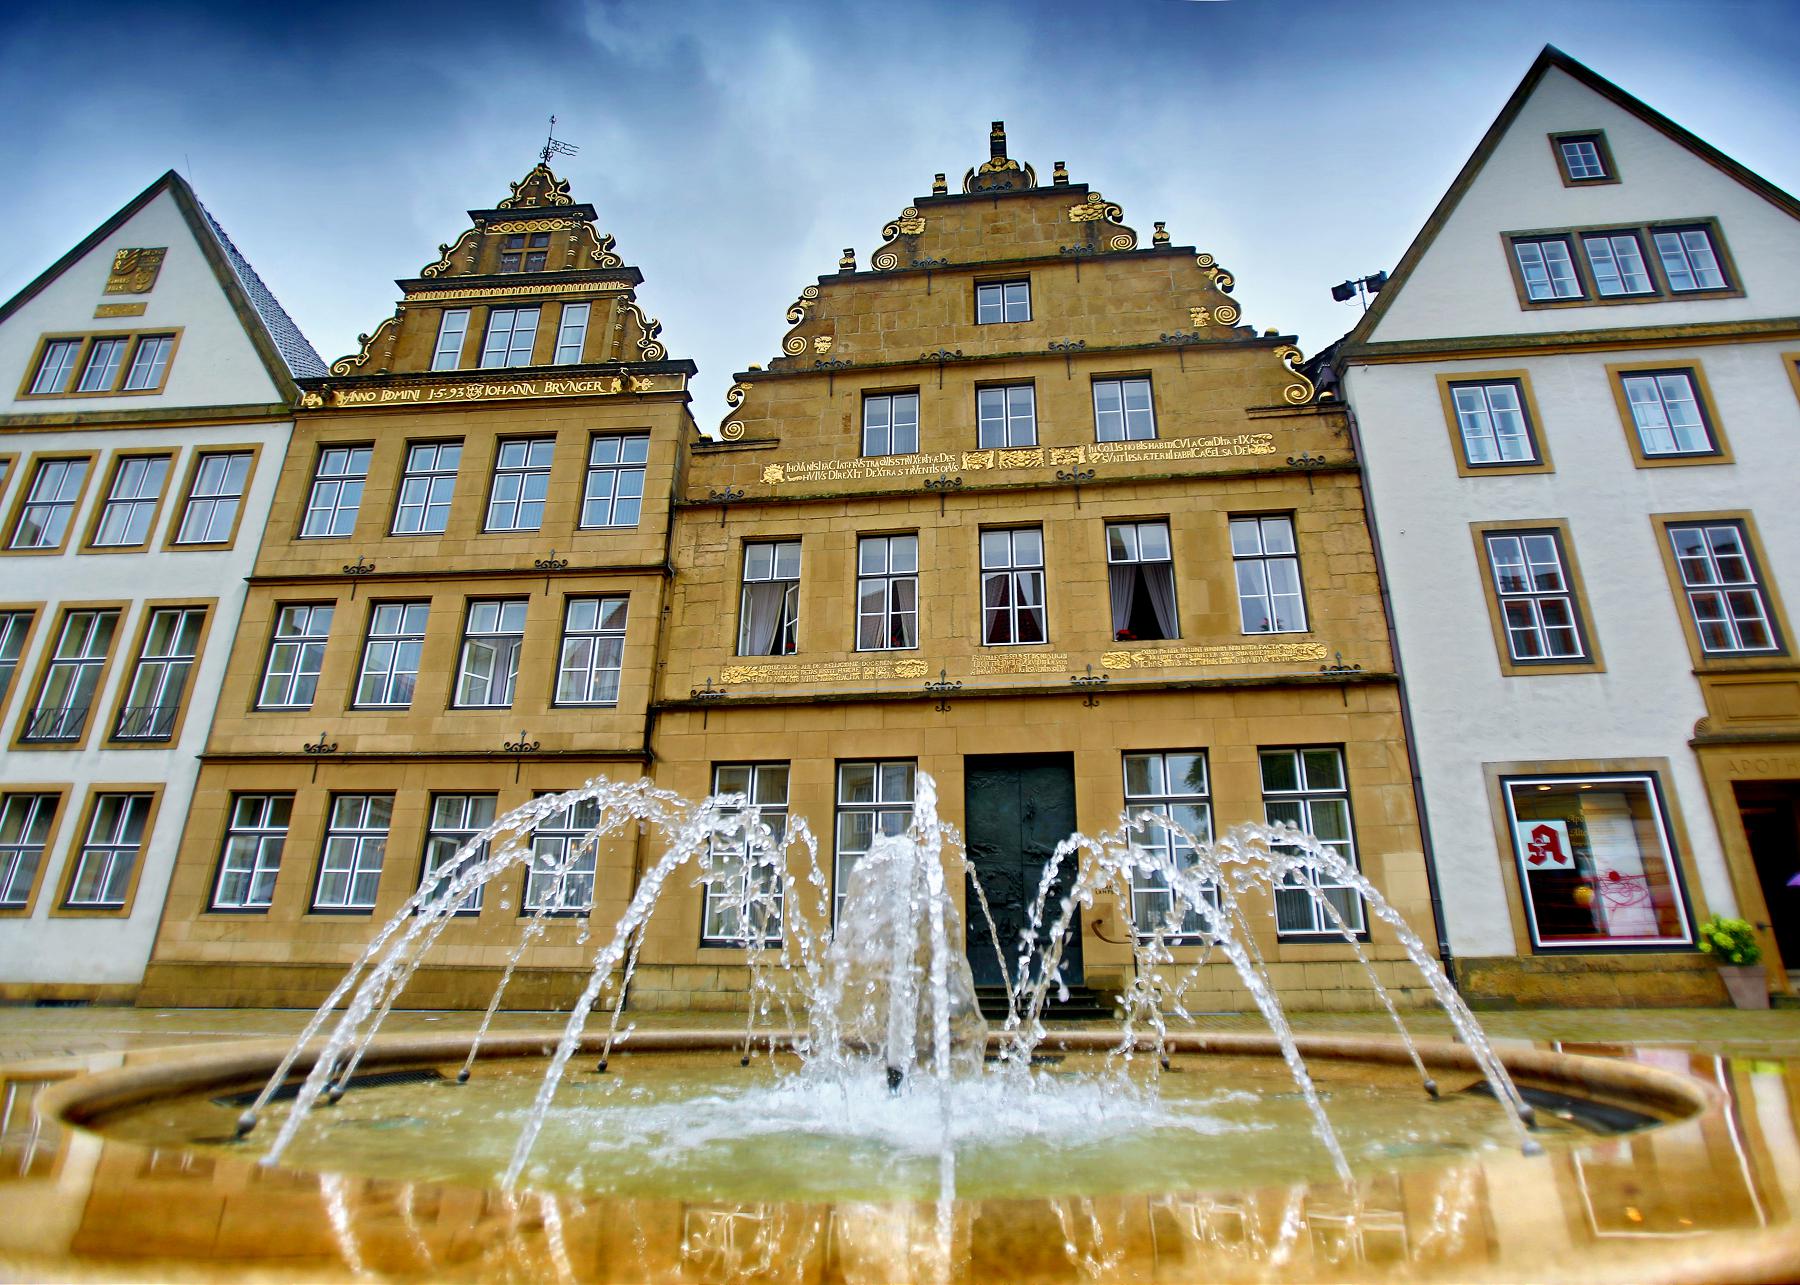 Buildings at the Bielefeld Historic Center